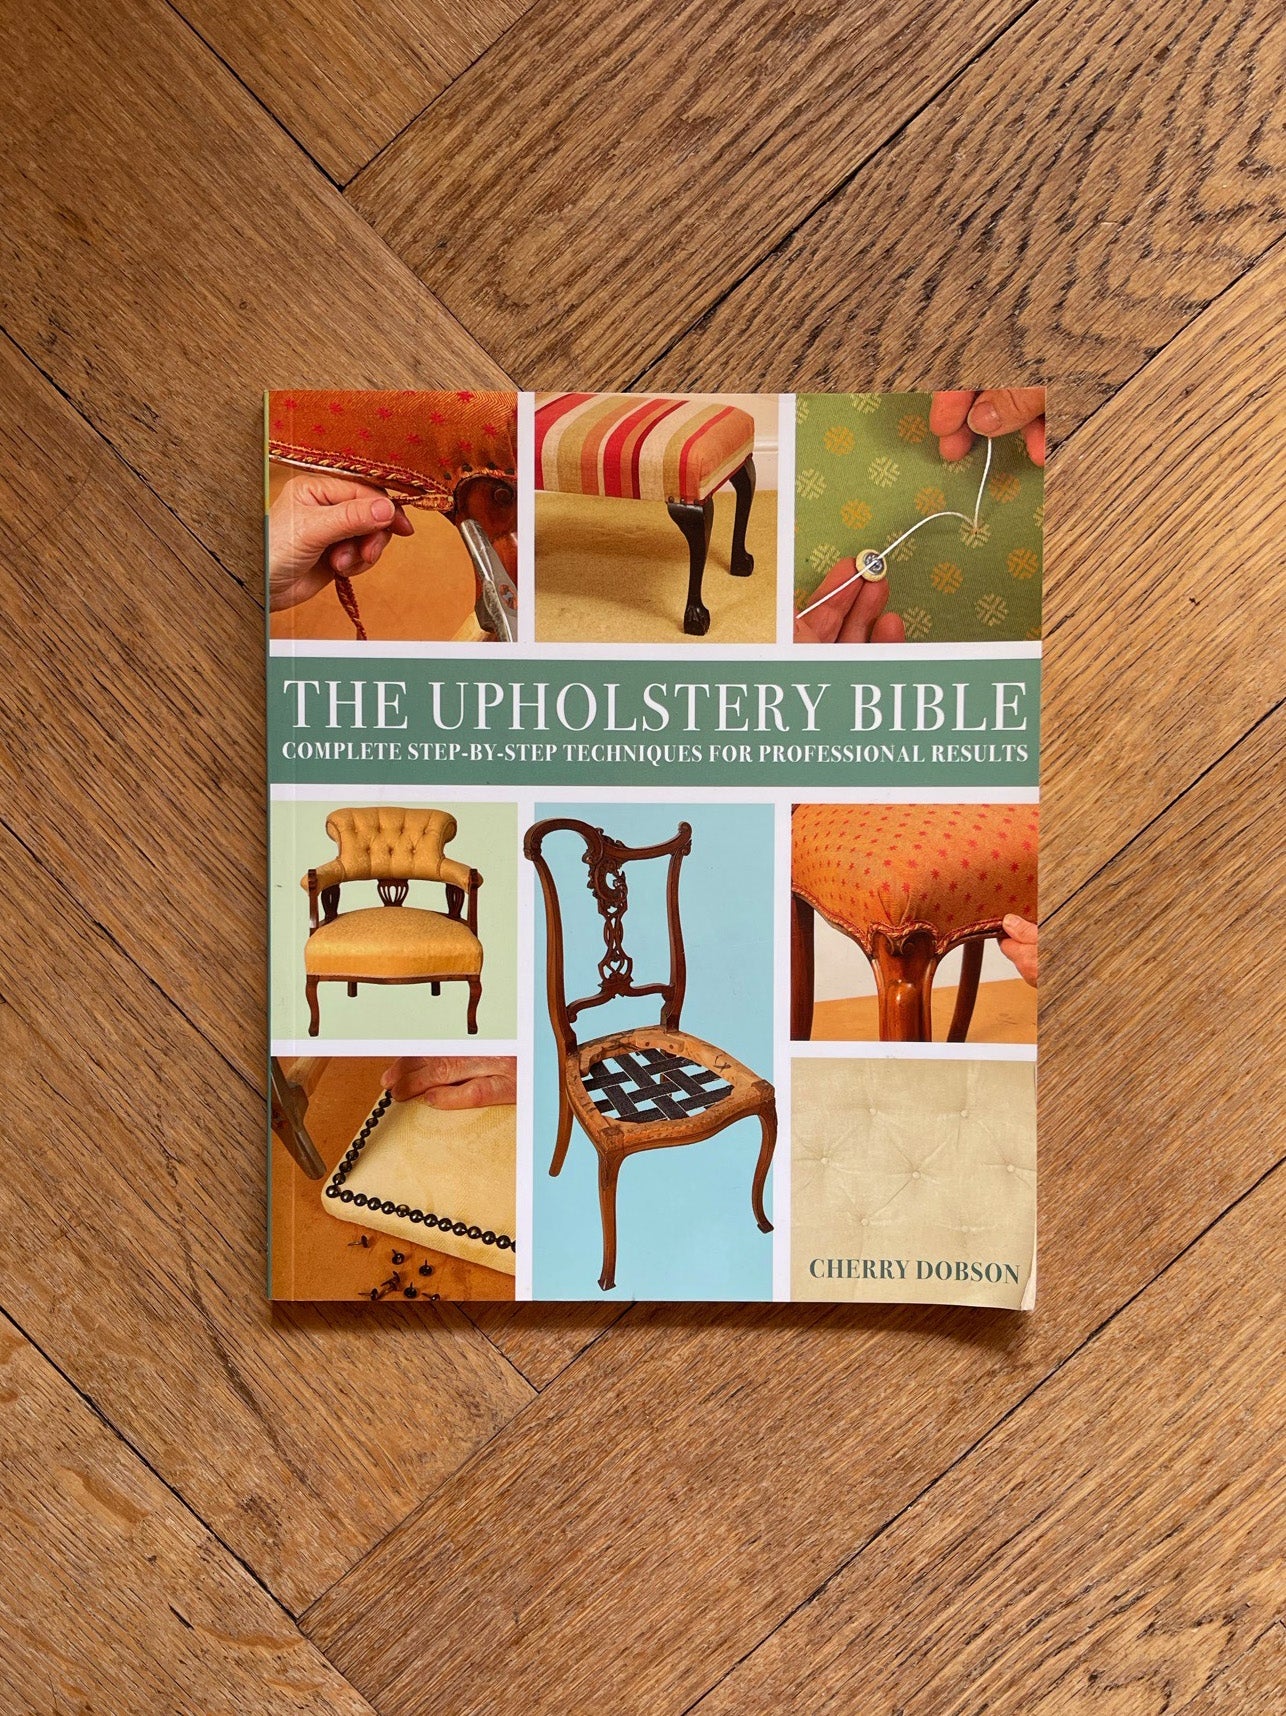 The Upholstery Bible by Cherry Dobson